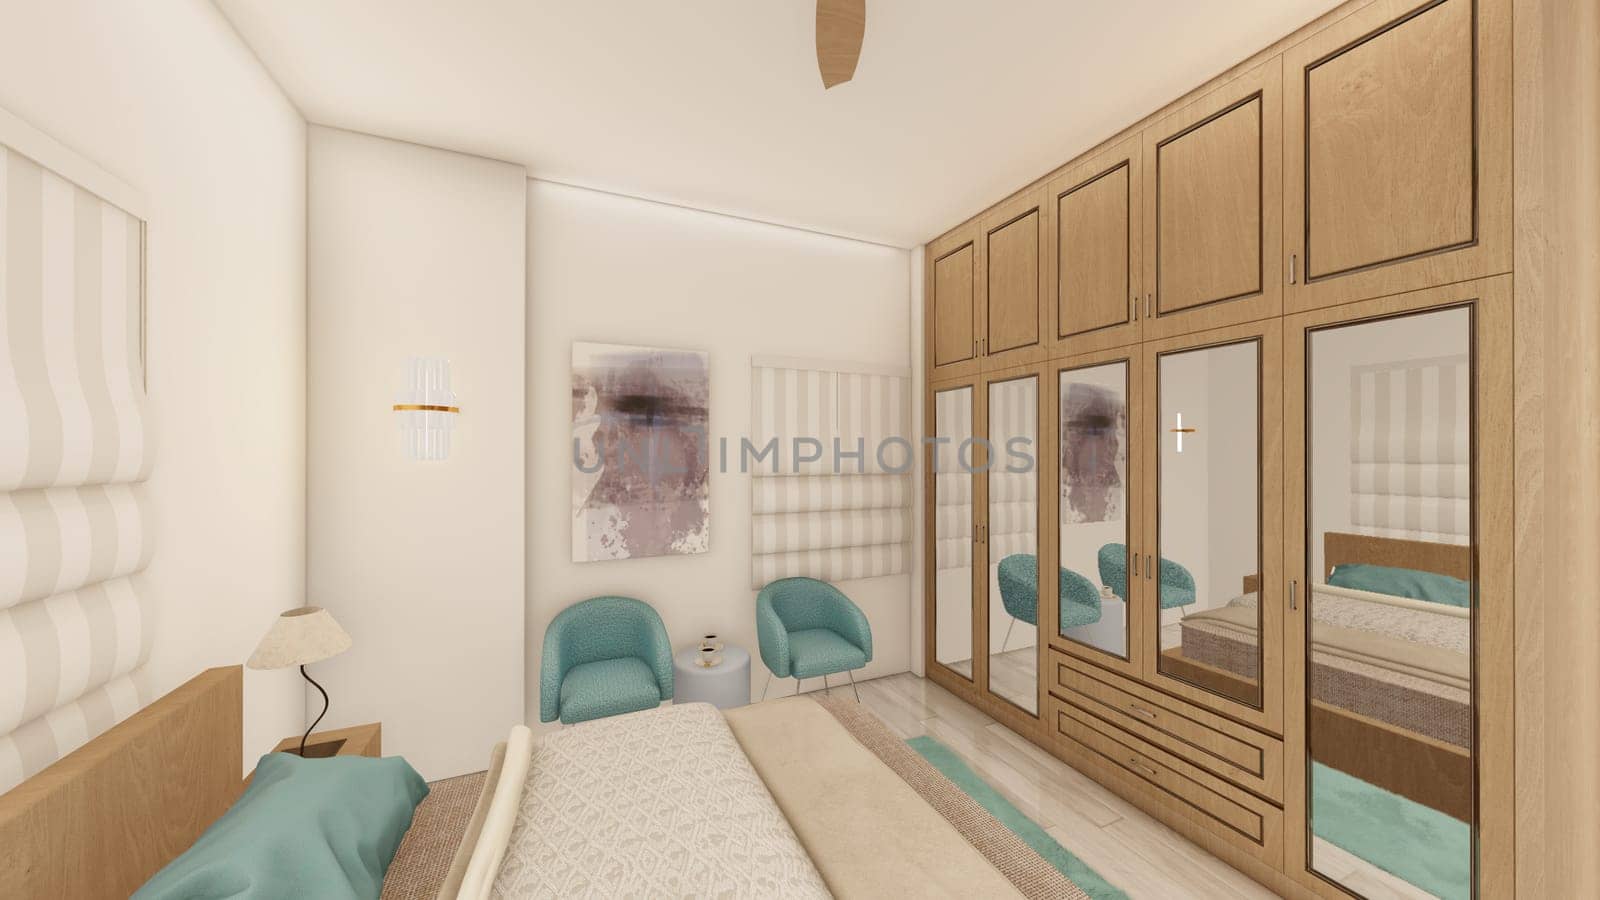 Realistic bedroom perspective 3d rendering by shawlinmohd